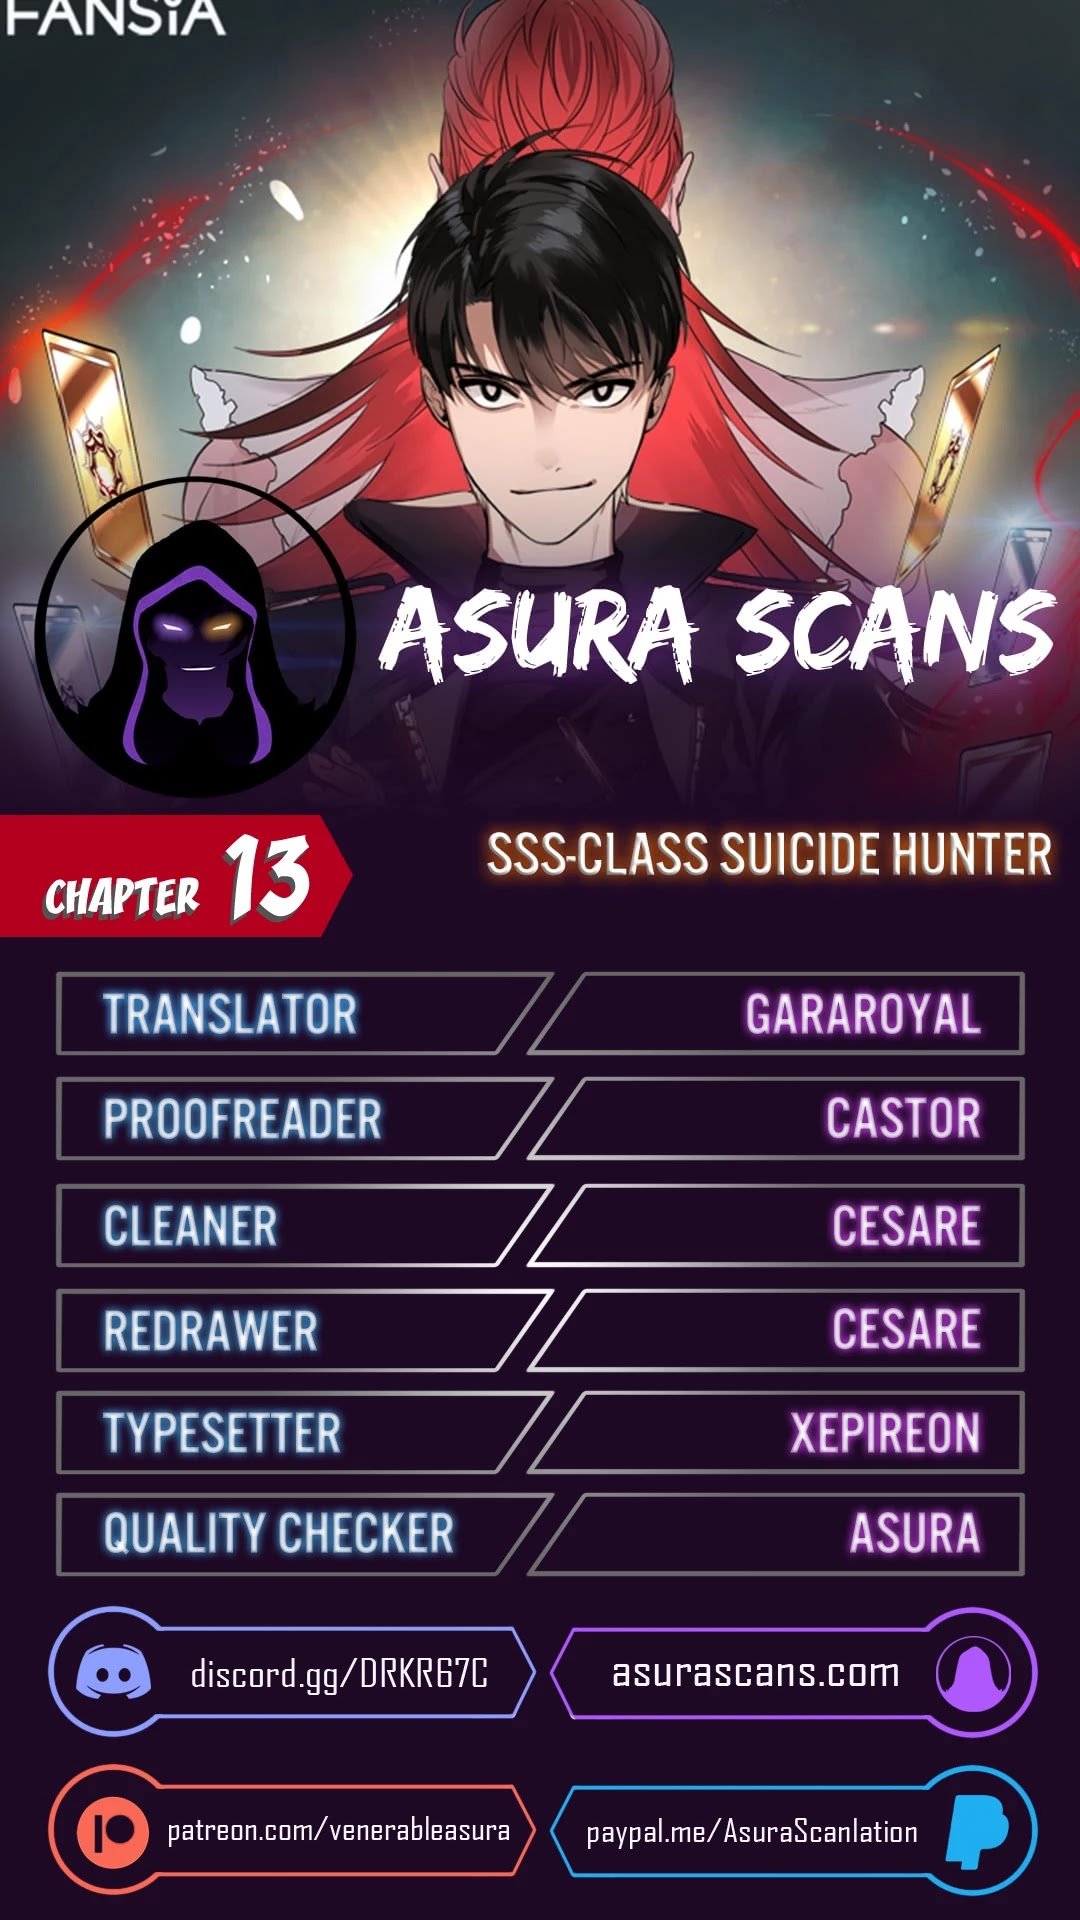 SSS-Class Suicide Hunter chapter 13